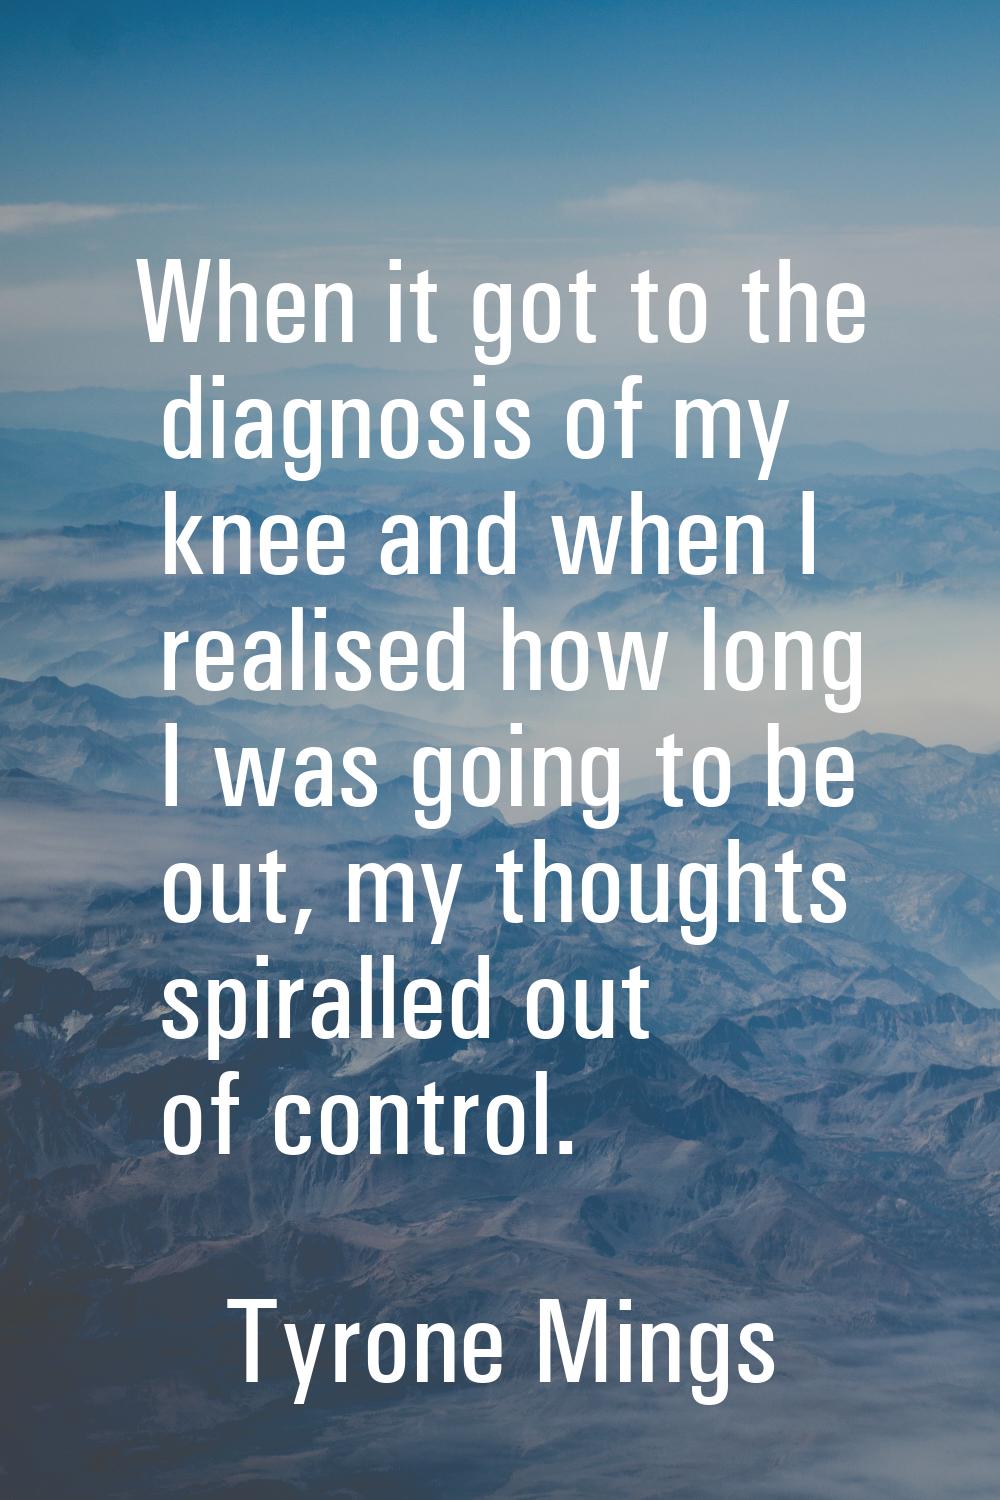 When it got to the diagnosis of my knee and when I realised how long I was going to be out, my thou